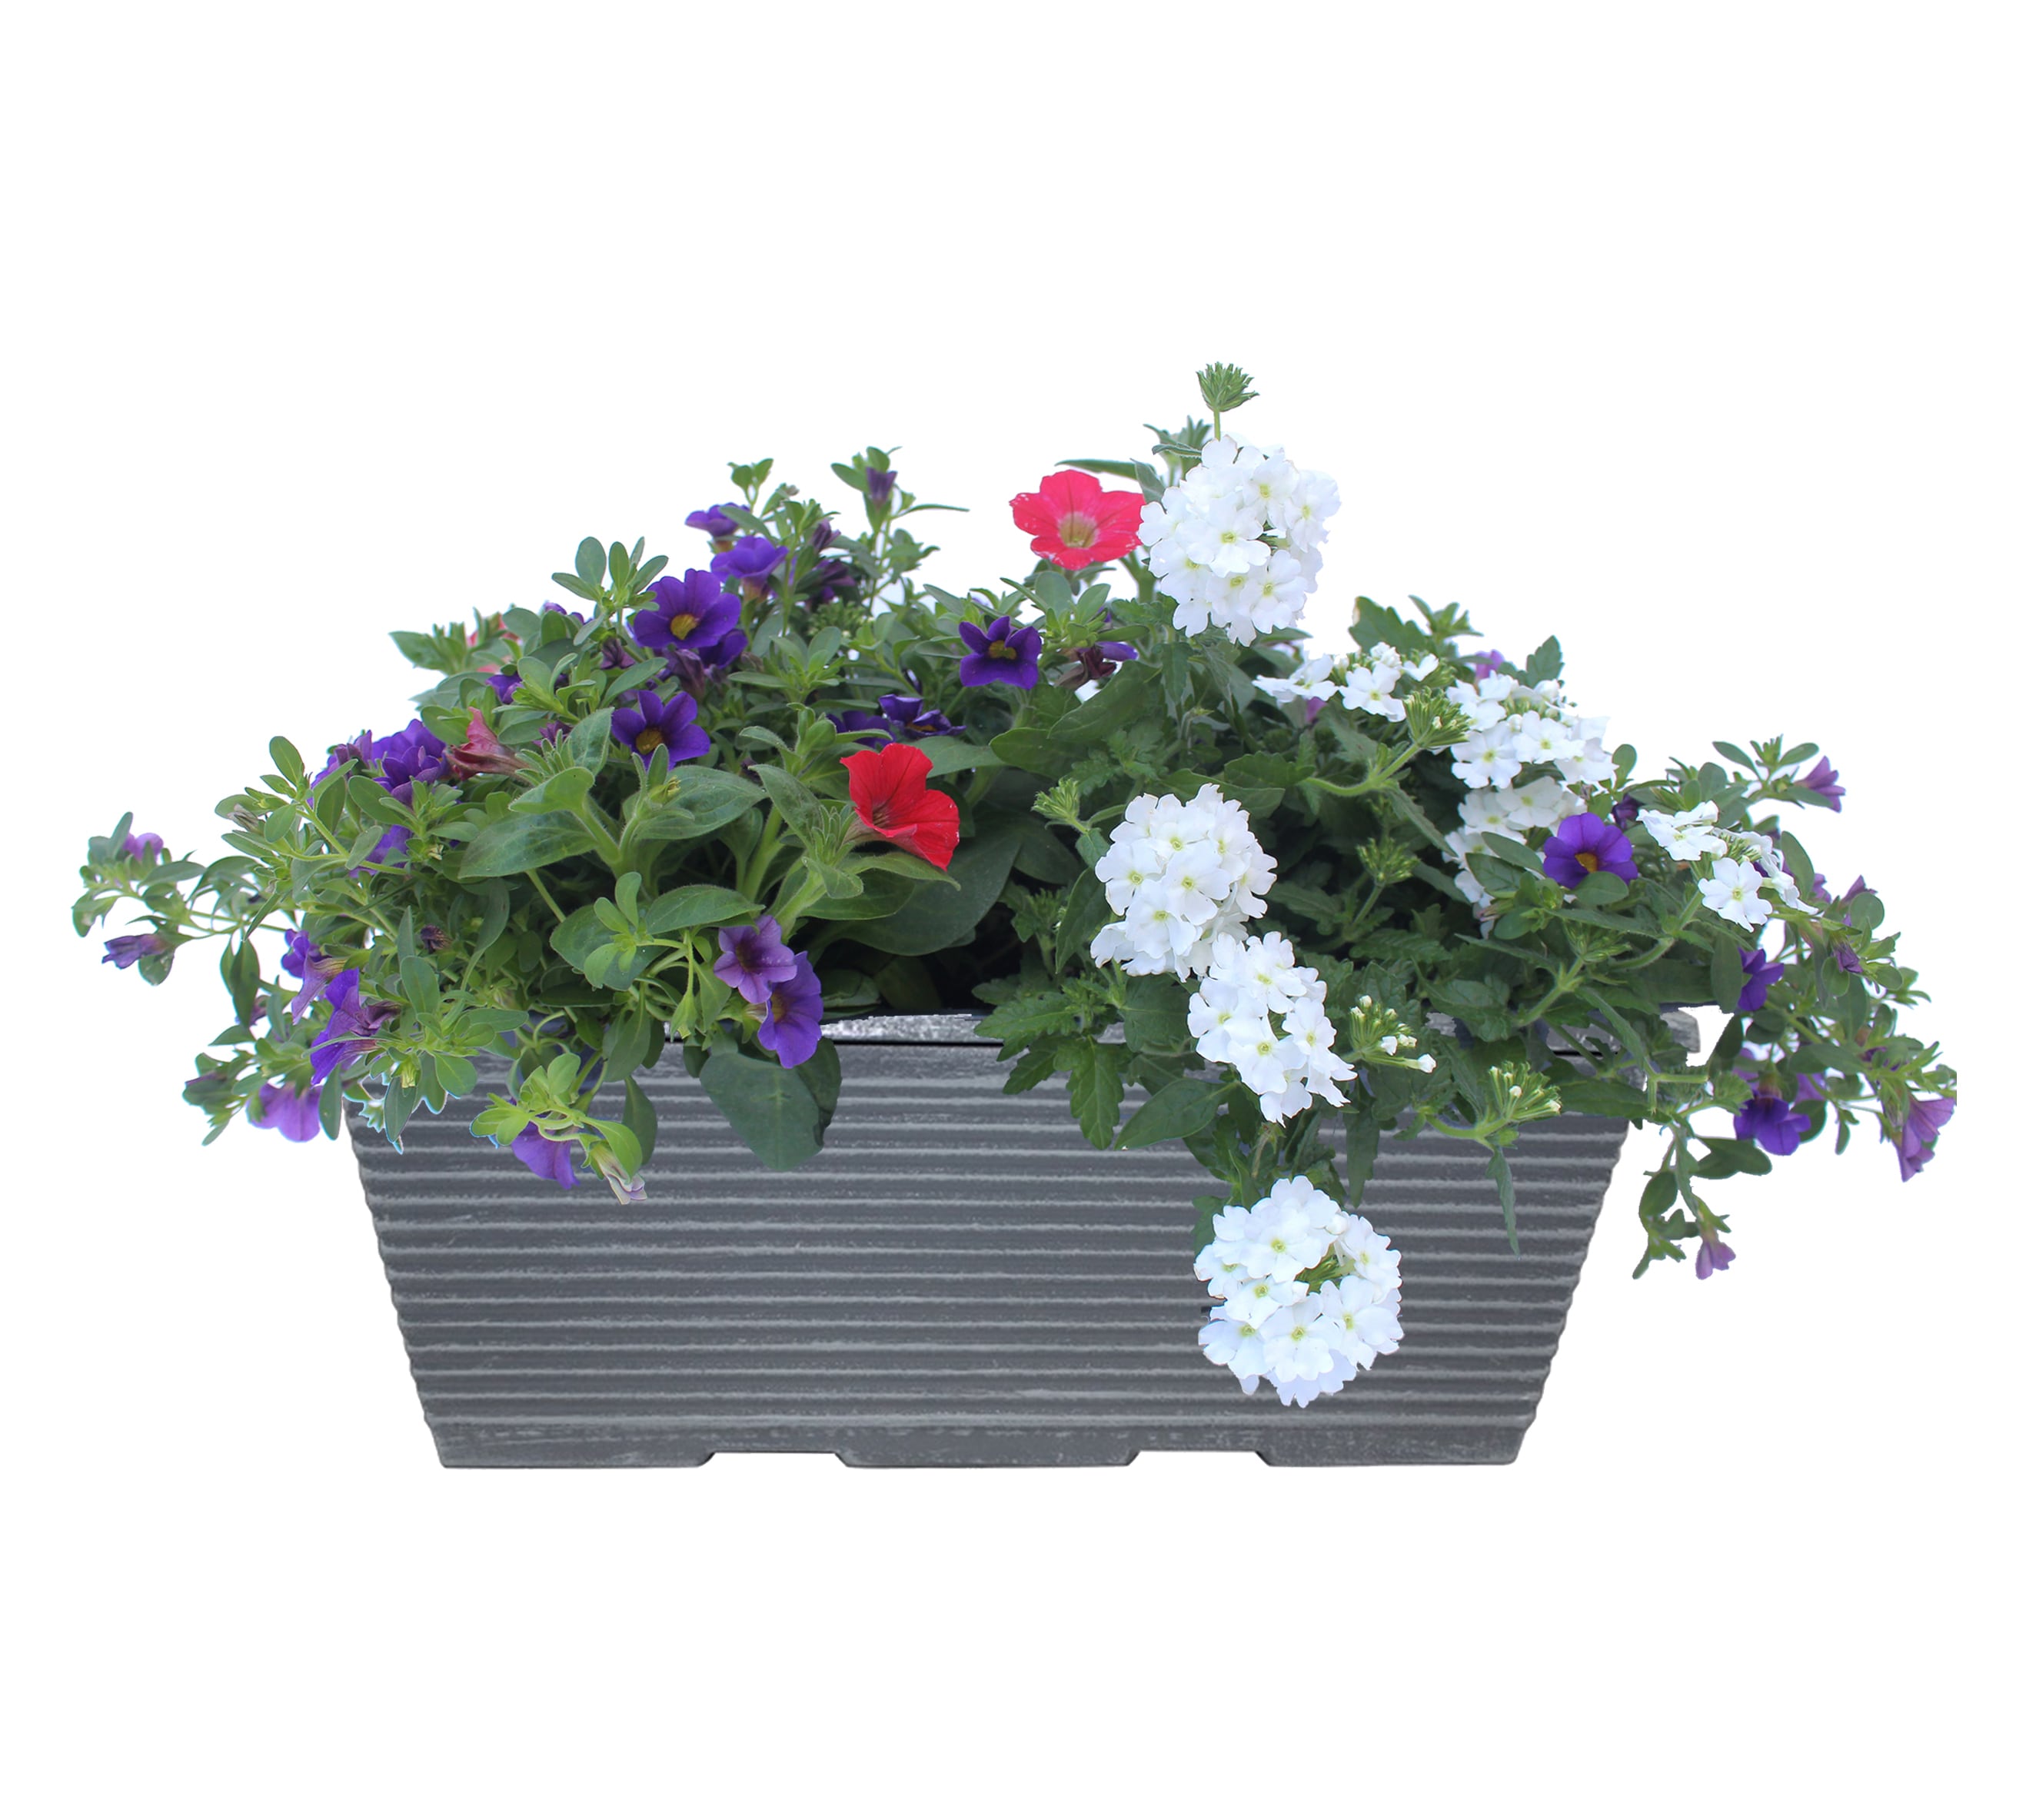 Lowe's Multicolor Combo in 1.5-Gallons Planter at Lowes.com